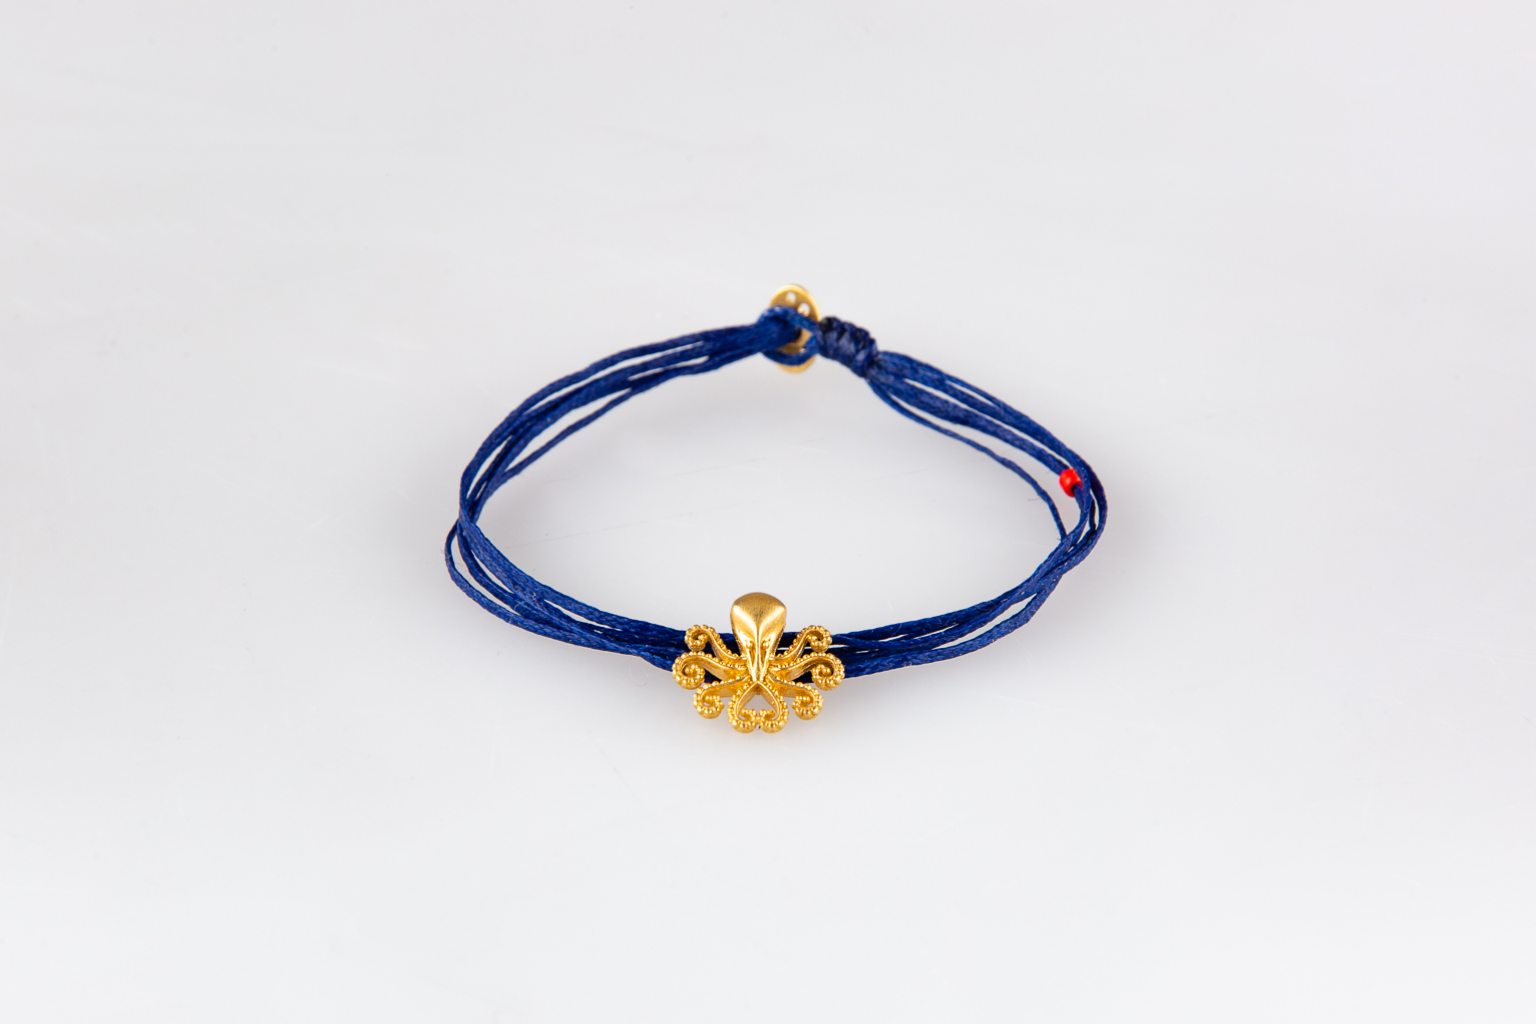 Bracelet with gold-plated octopus